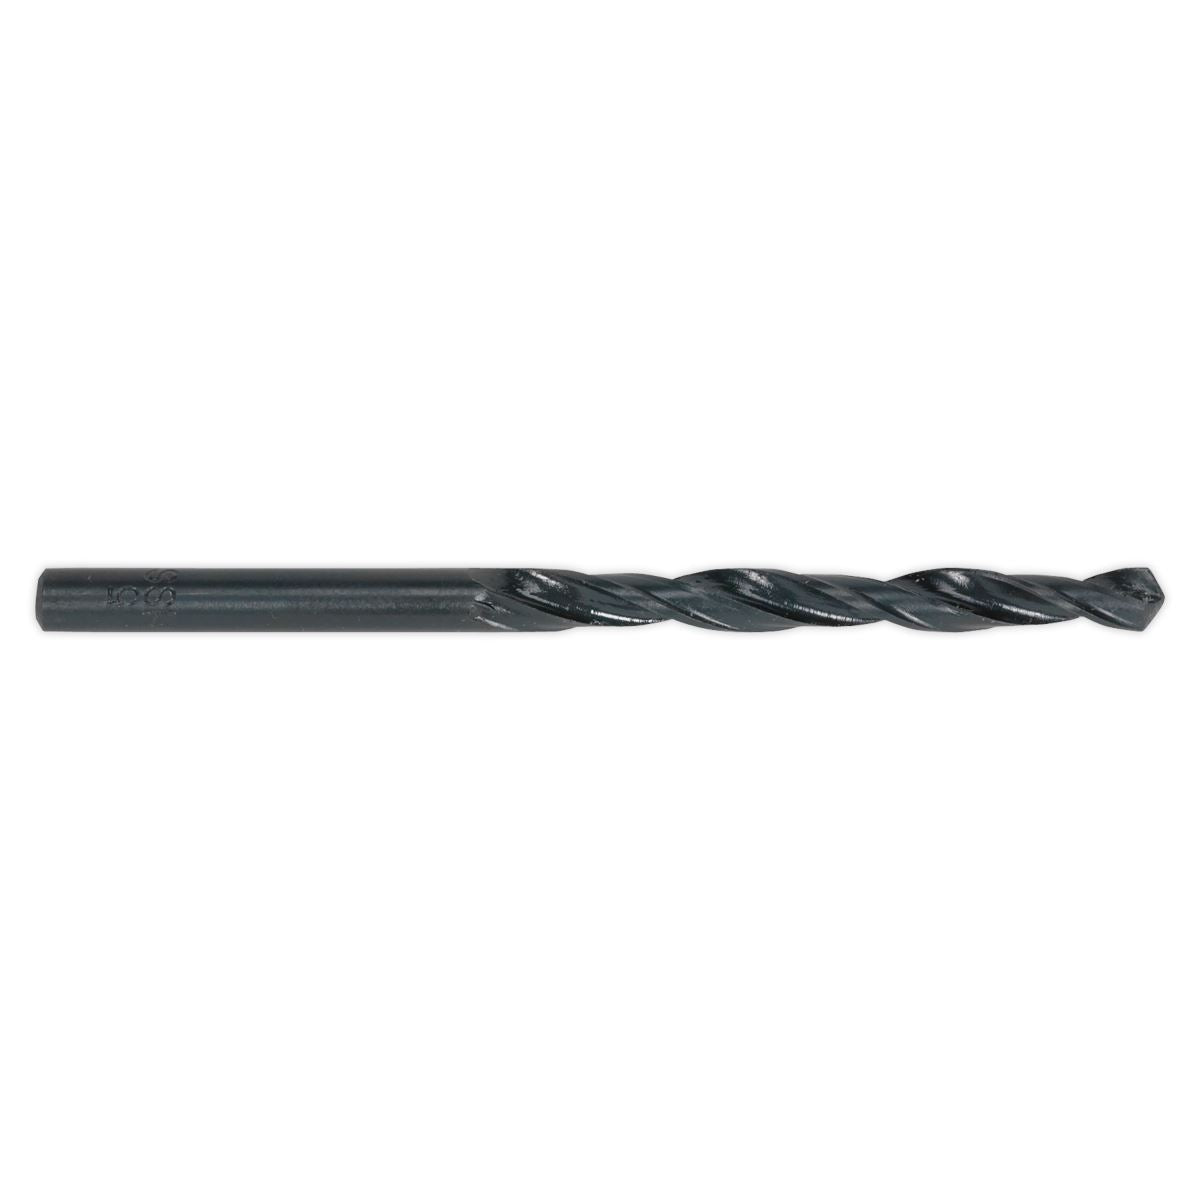 Sealey HSS Roll Forged Drill Bit Ø7.5mm Pack of 10